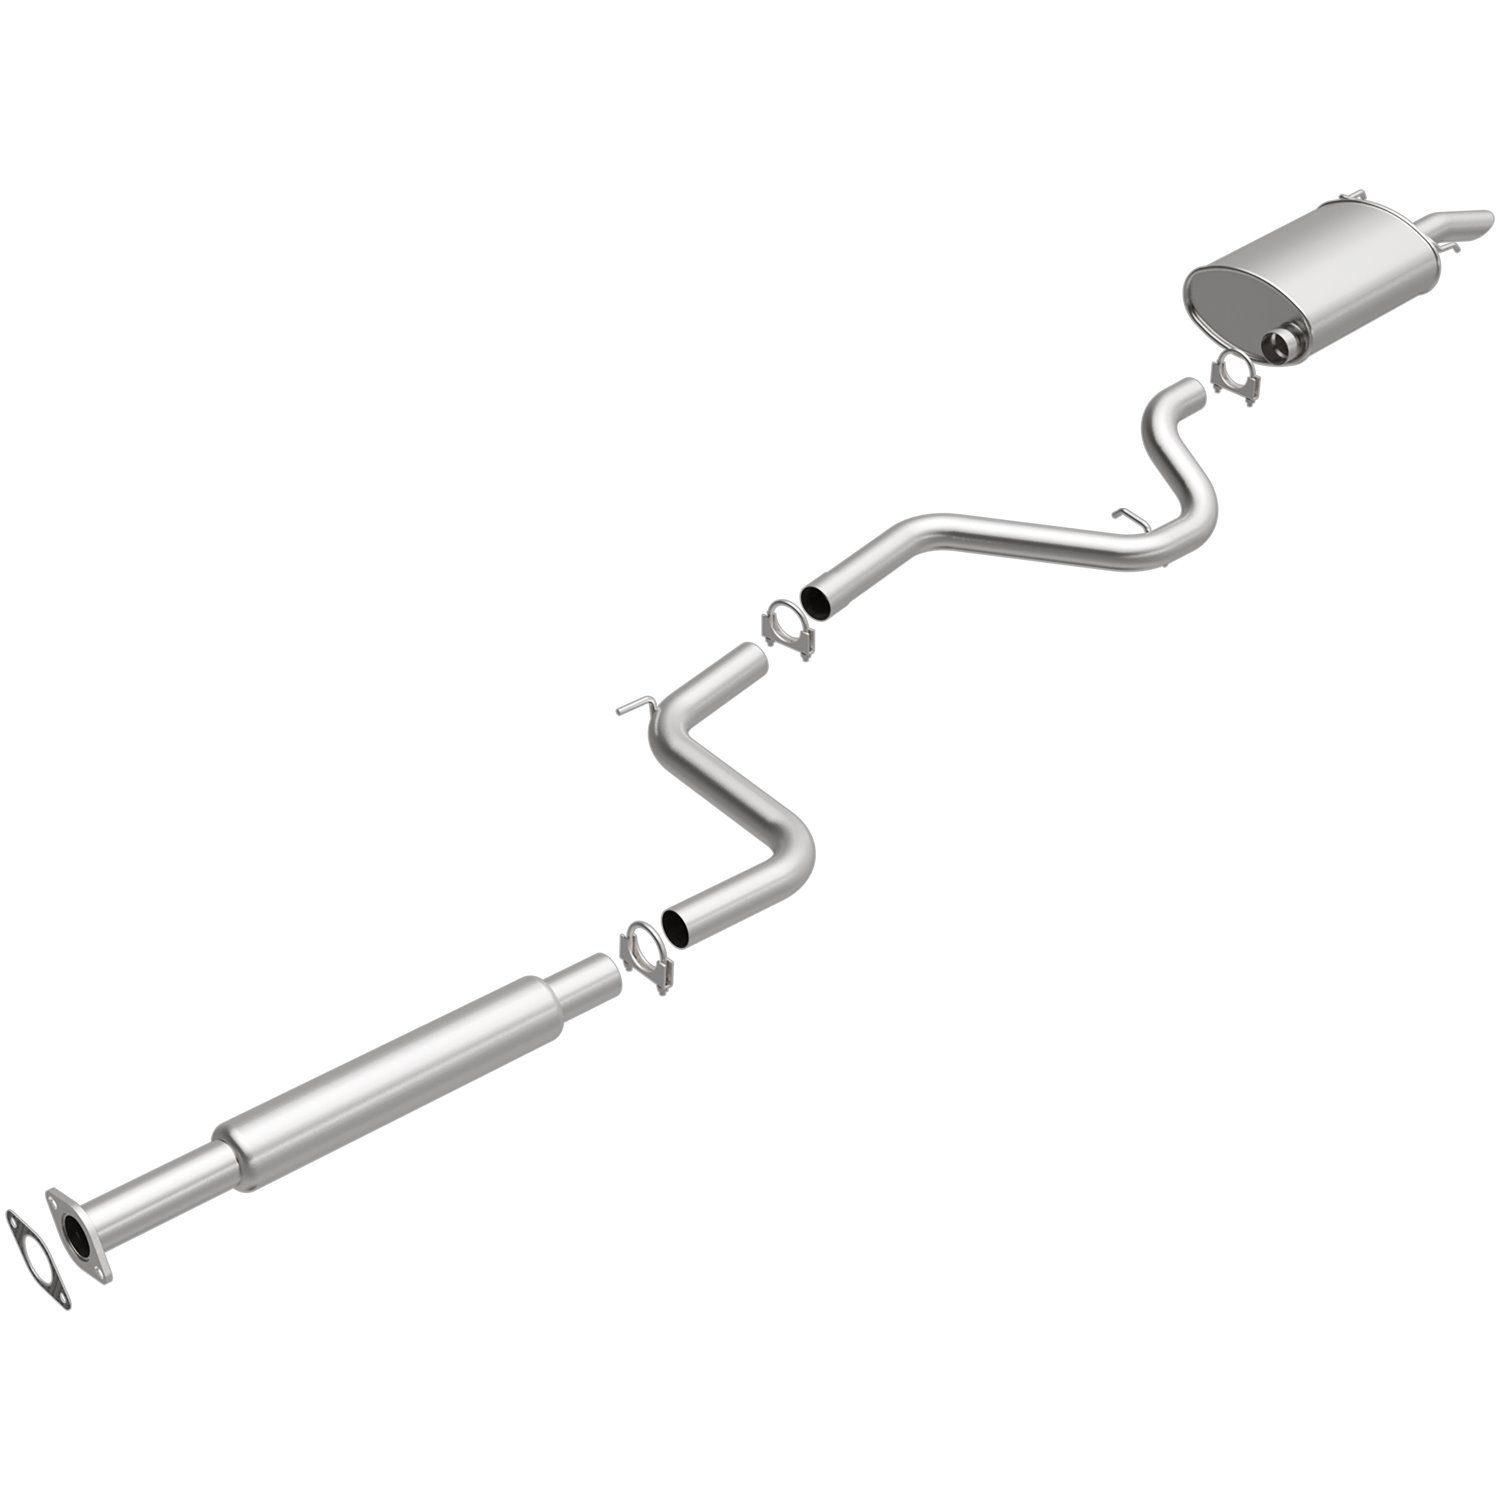 Direct-Fit Exhaust Kit, 2000-2002 Chevy Impala 3.4L